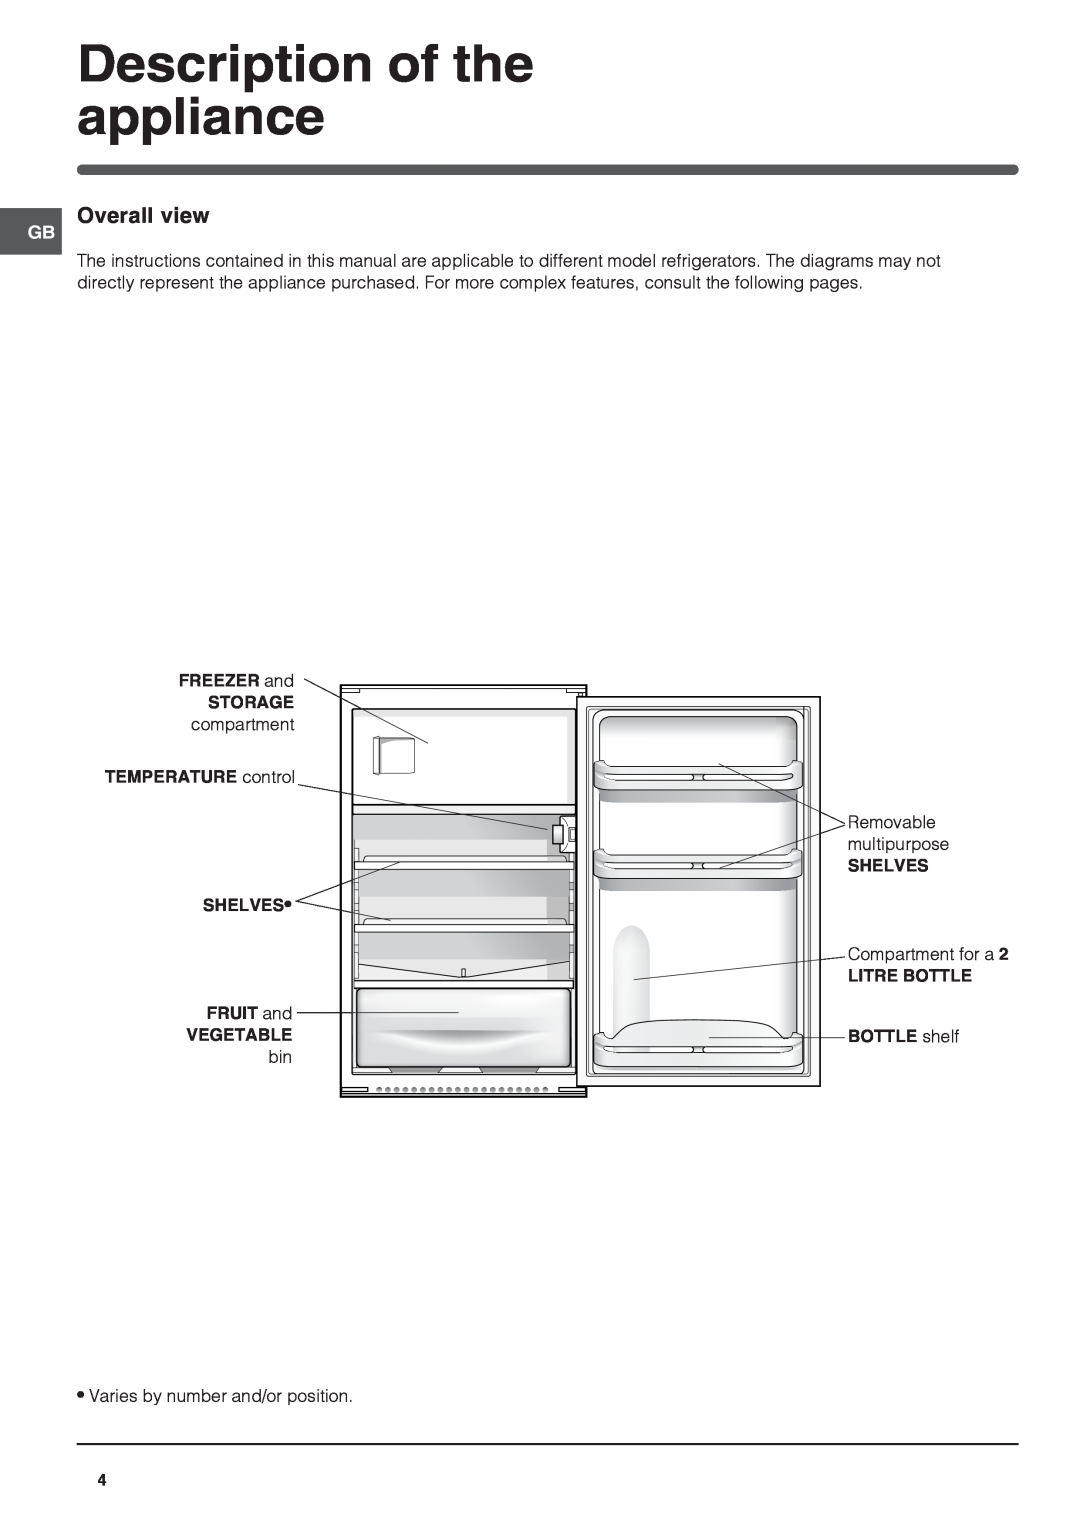 Indesit IN S 1610 UK operating instructions Description of the appliance, Overall view 